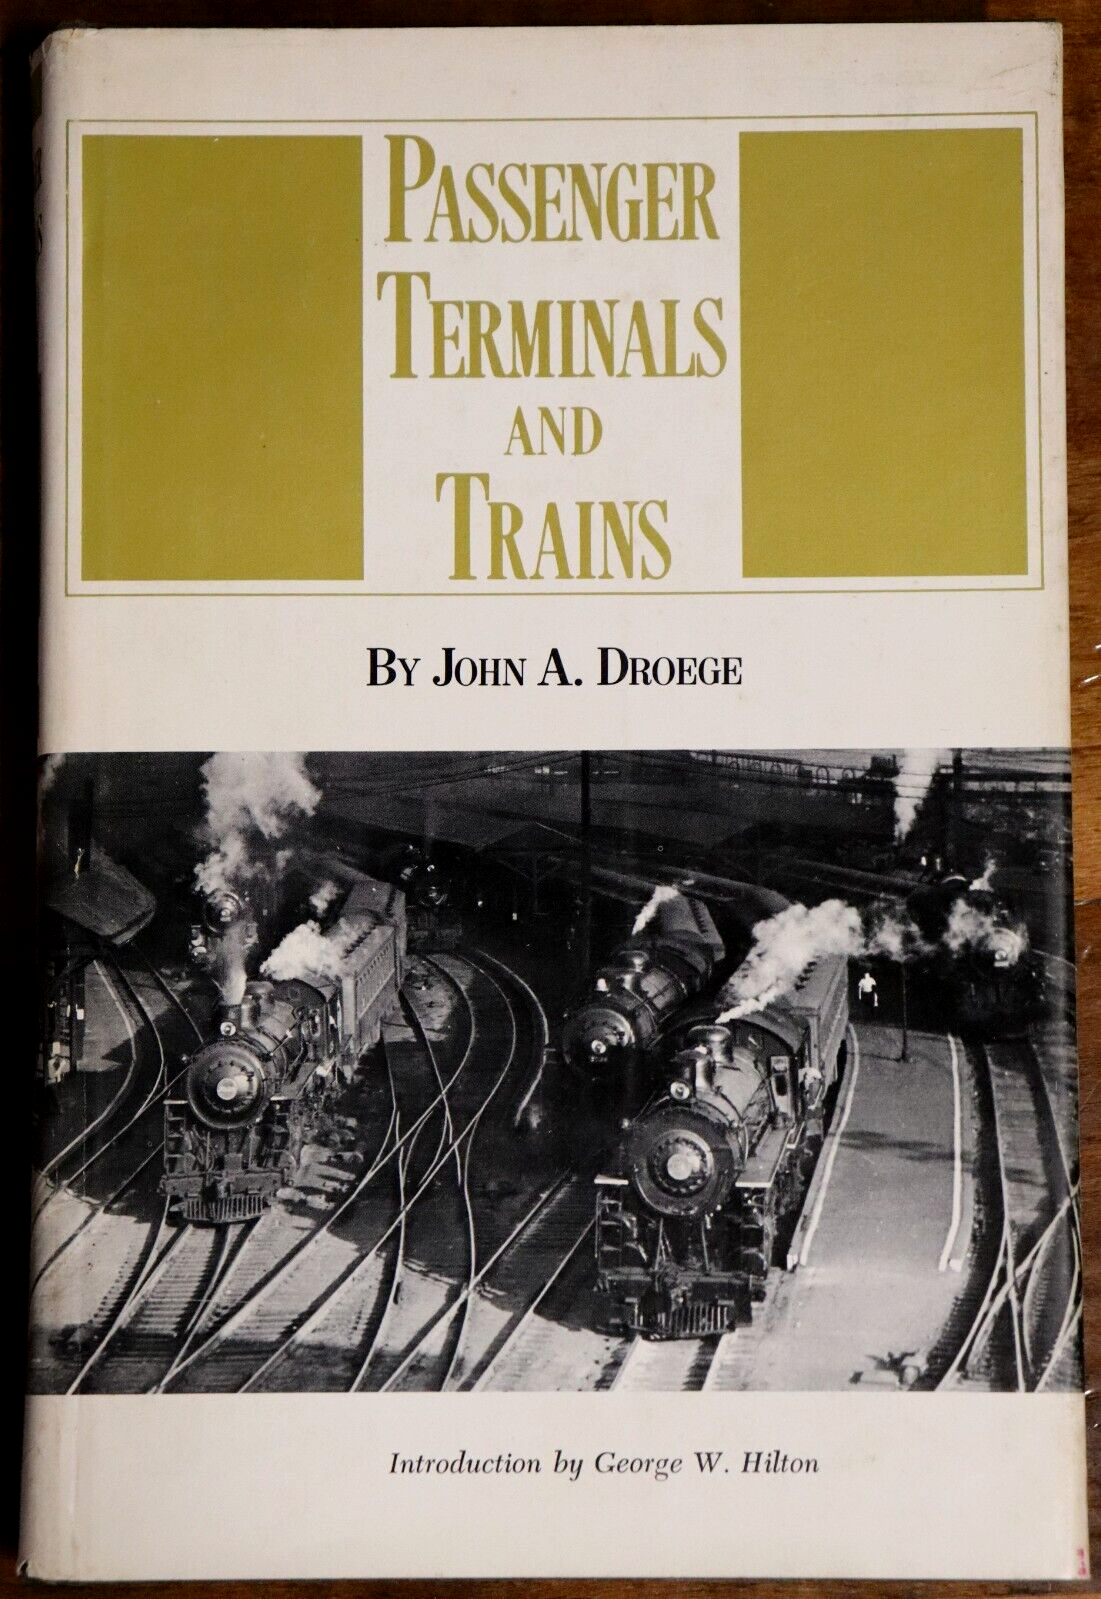 Passenger Terminals & Trains by  J.A. Droege - 1969 - Railway History Book